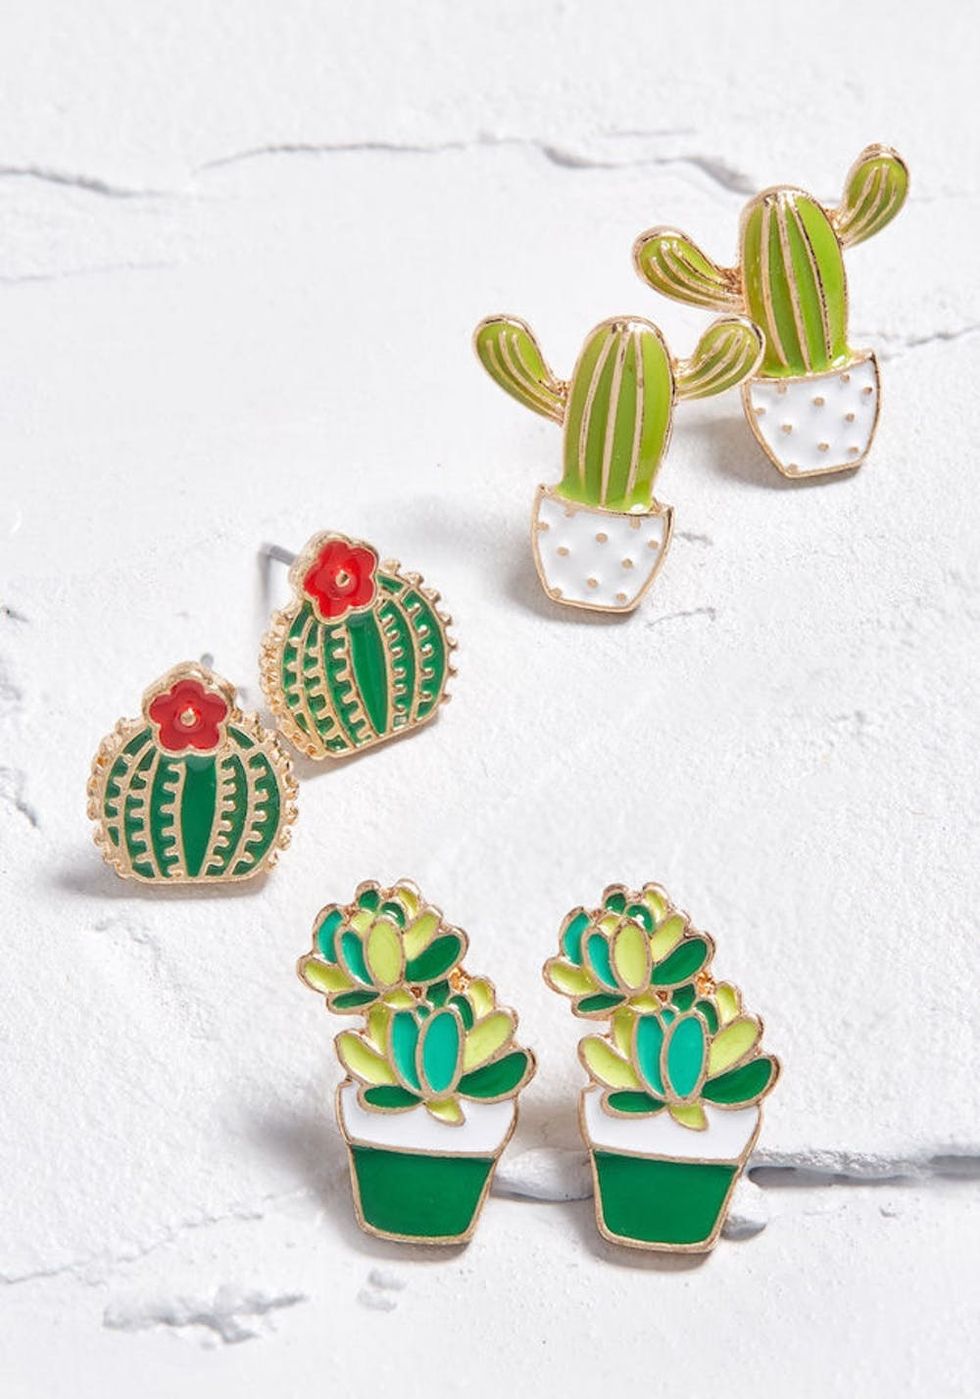 11 Sharp Gifts for People Who Can’t Get Enough Cacti - Brit + Co